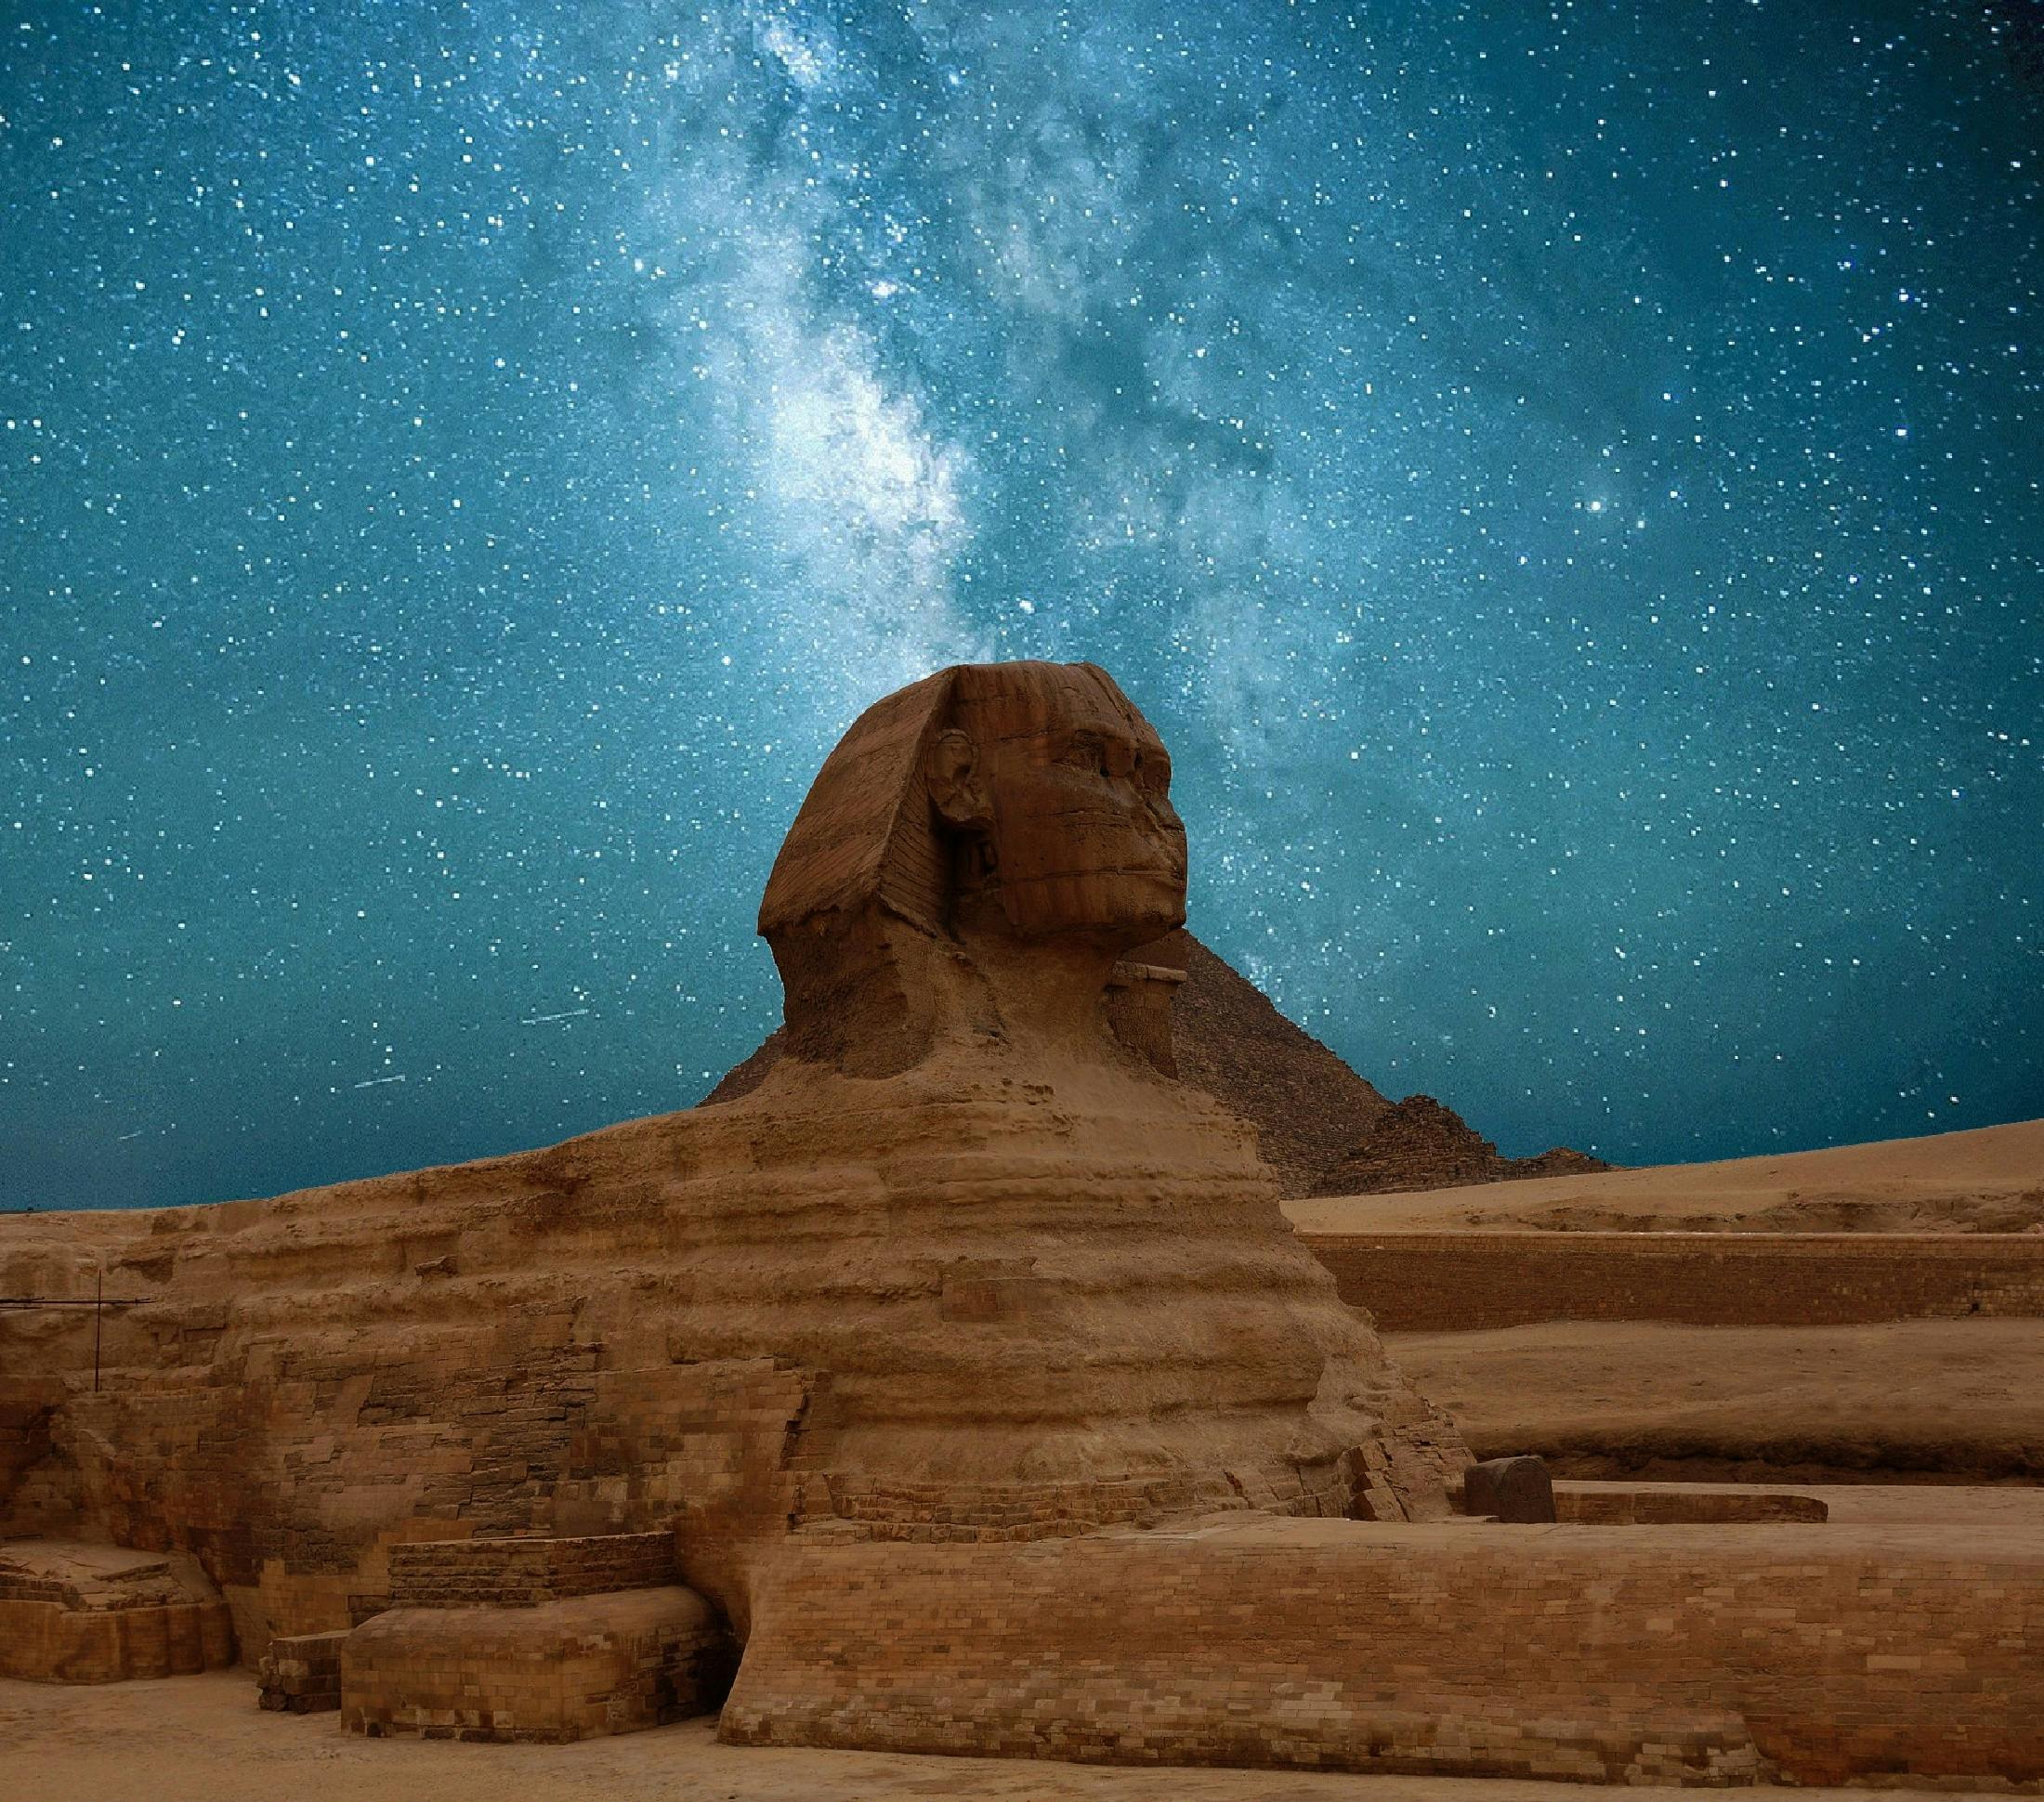 What makes Egypt a must-visit destination for travelers?